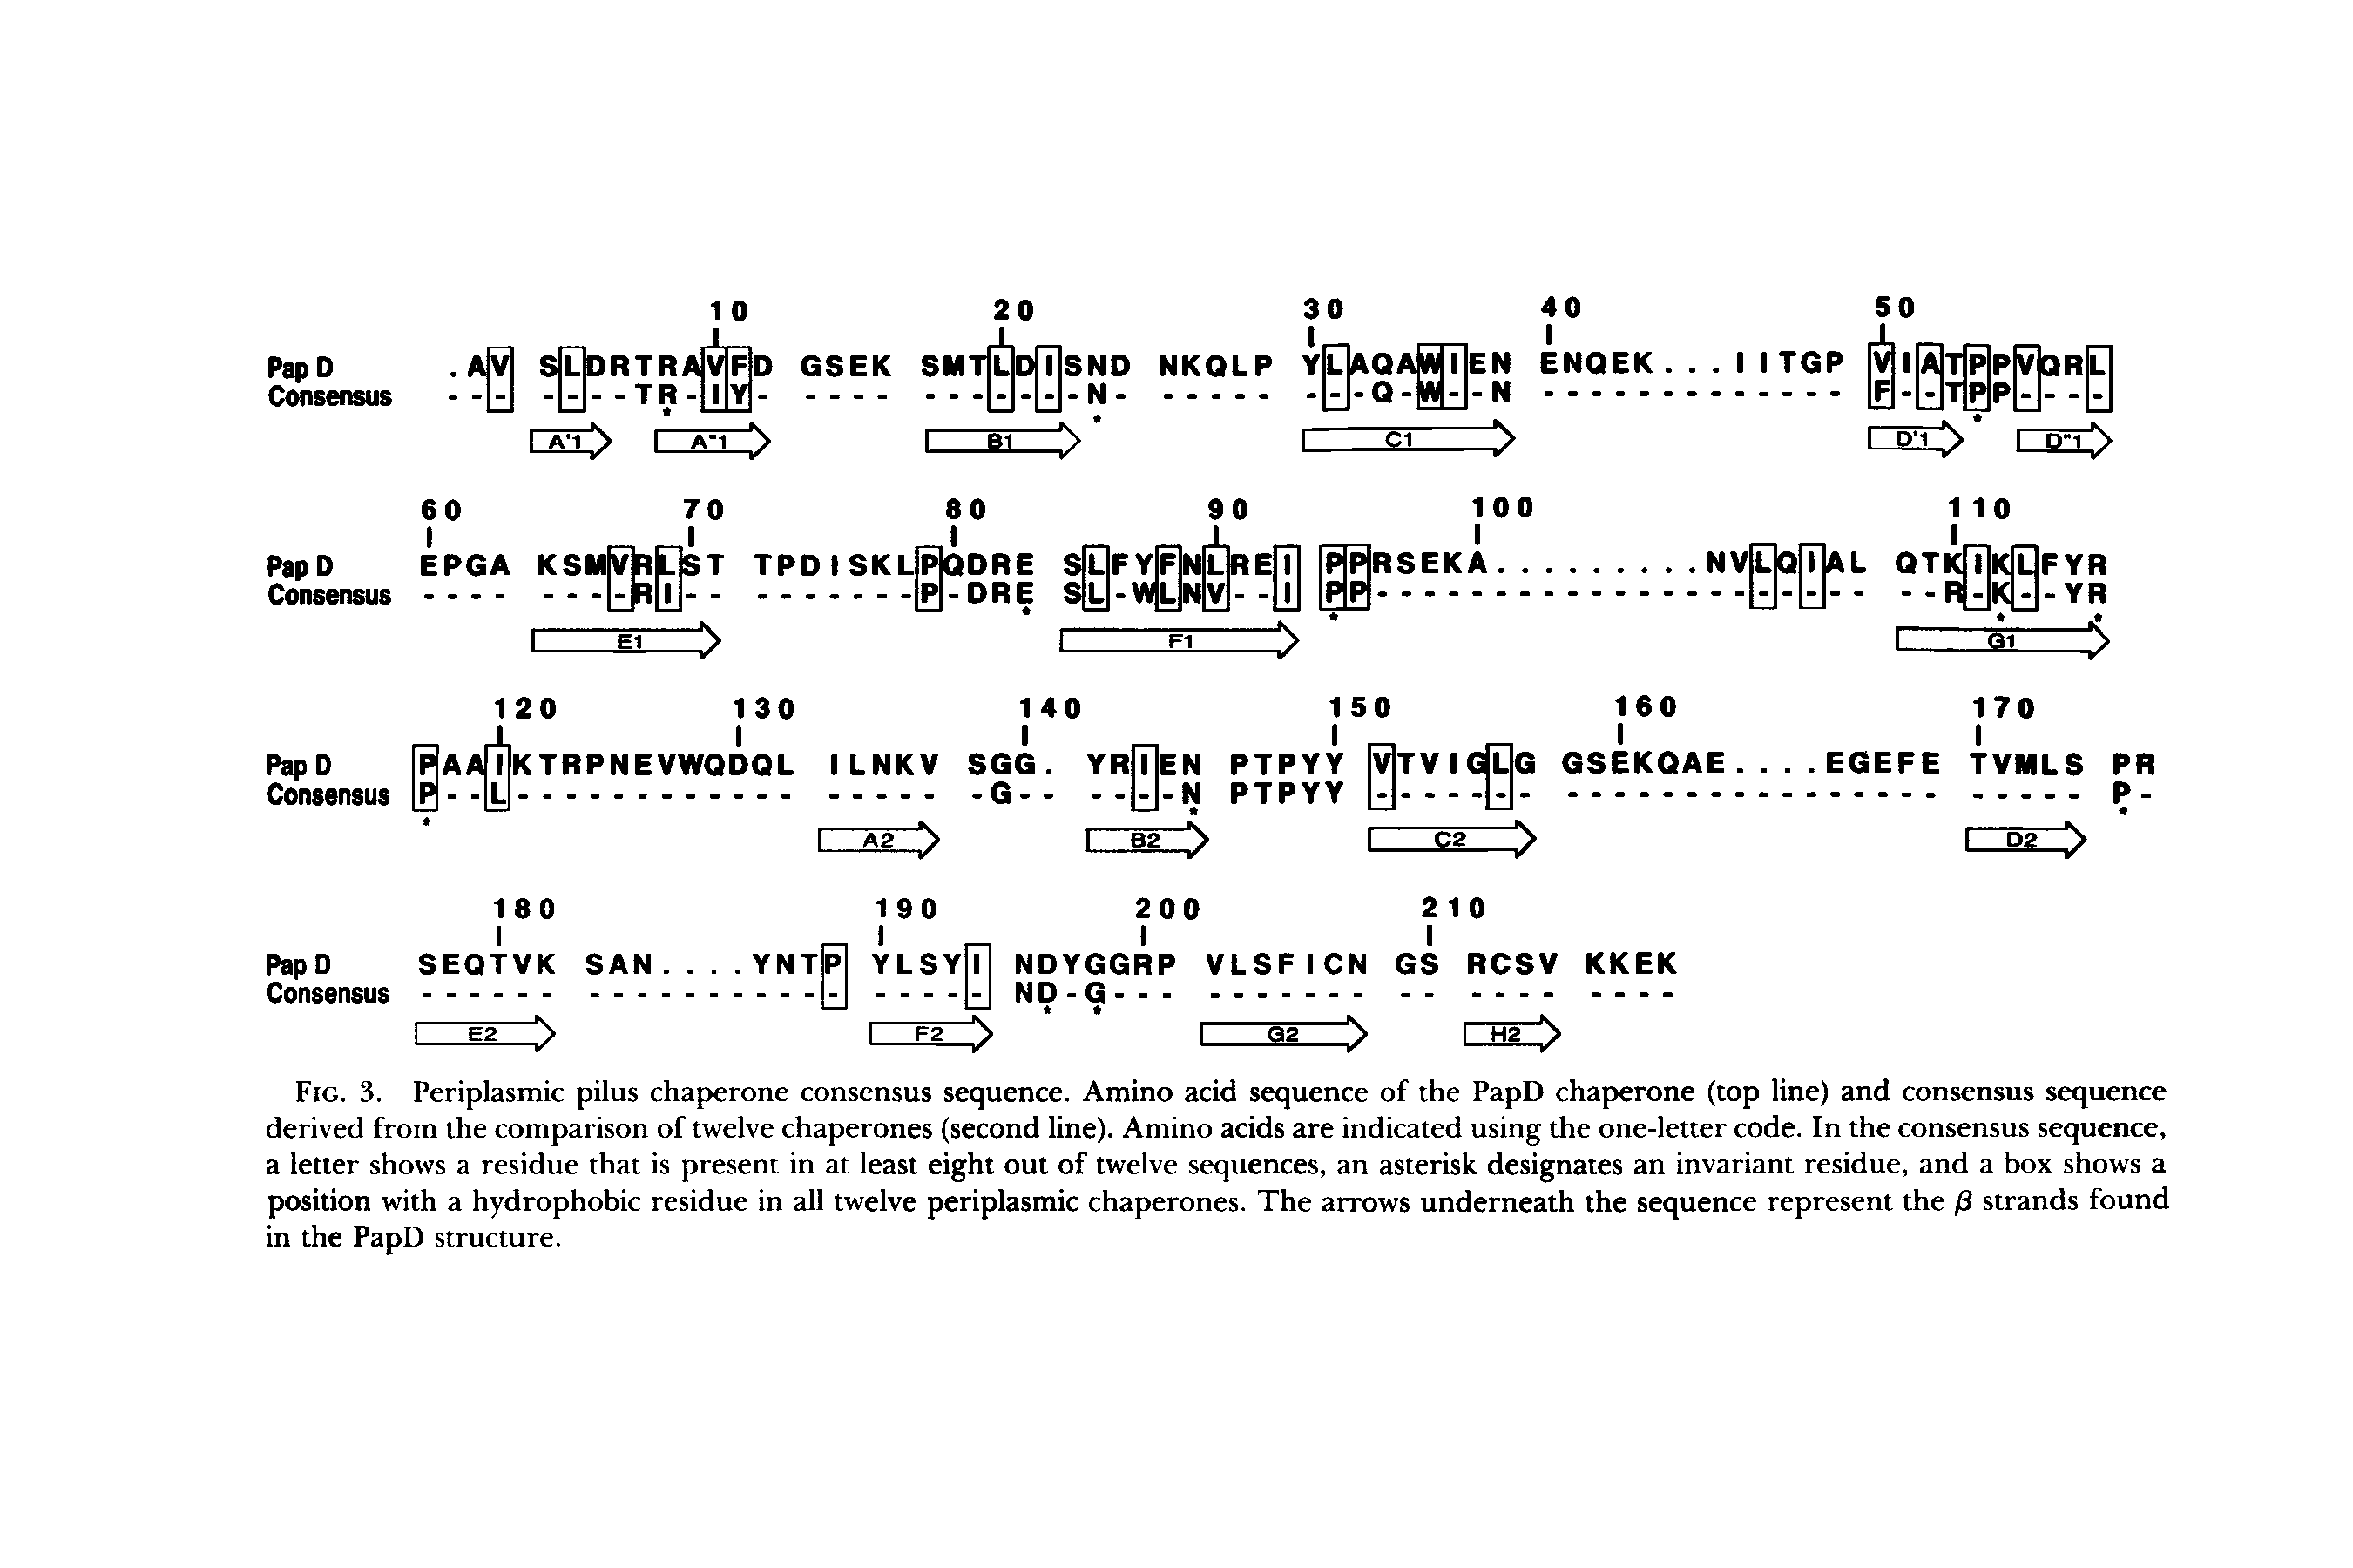 Fig. 3. Periplasmic pilus chaperone consensus sequence. Amino acid sequence of the PapD chaperone (top line) and consensus sequence derived from the comparison of twelve chaperones (second line). Amino acids are indicated using the one-letter code. In the consensus sequence, a letter shows a residue that is present in at least eight out of twelve sequences, an asterisk designates an invariant residue, and a box shows a position with a hydrophobic residue in all twelve periplasmic chaperones. The arrows underneath the sequence represent the /3 strands found in the PapD structure.